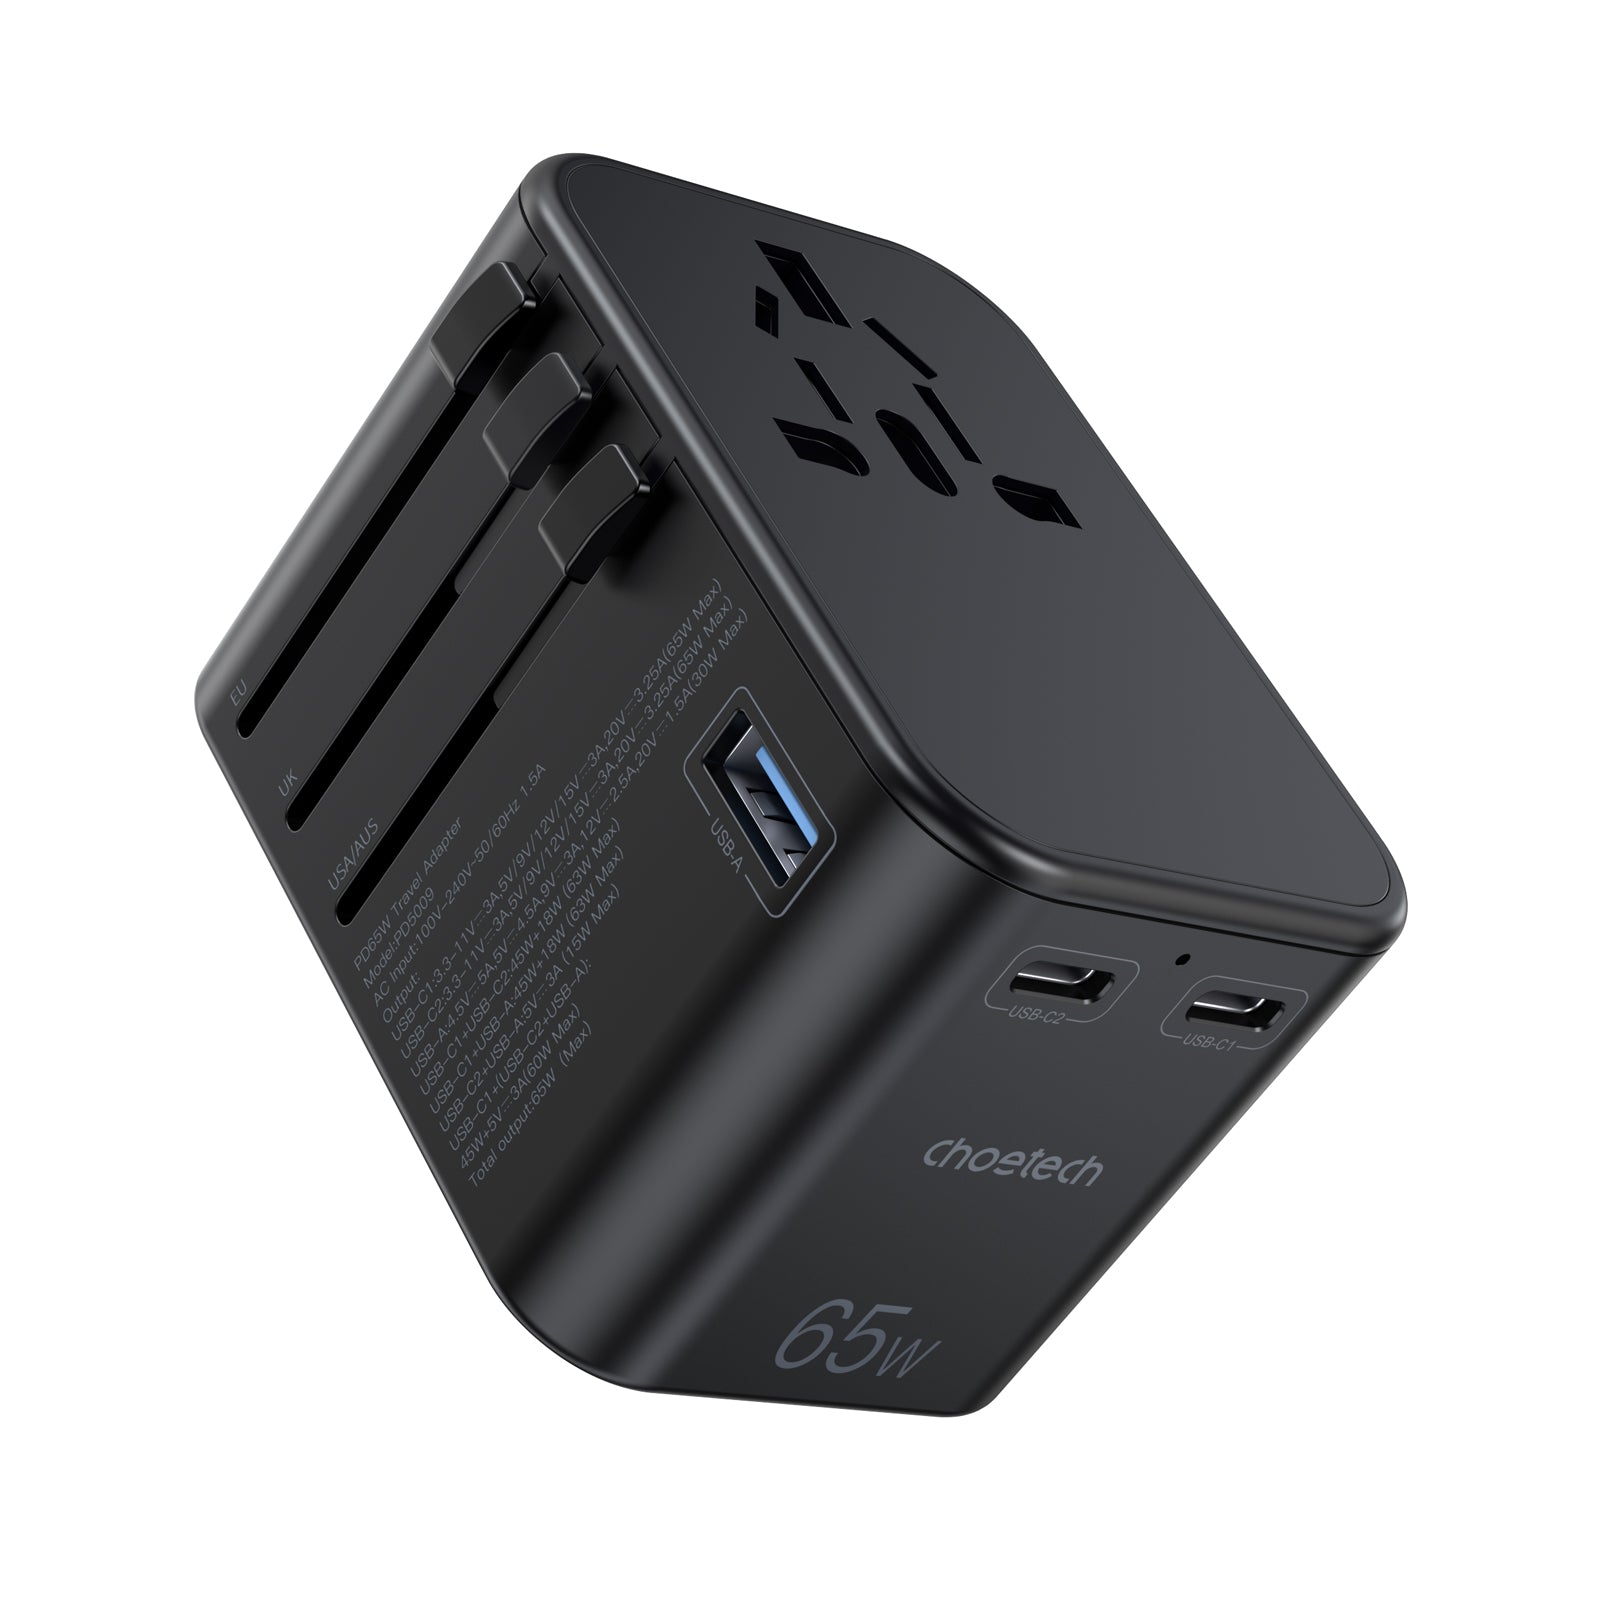 PD5009 Choetech 65W PD Travel Wall Charger